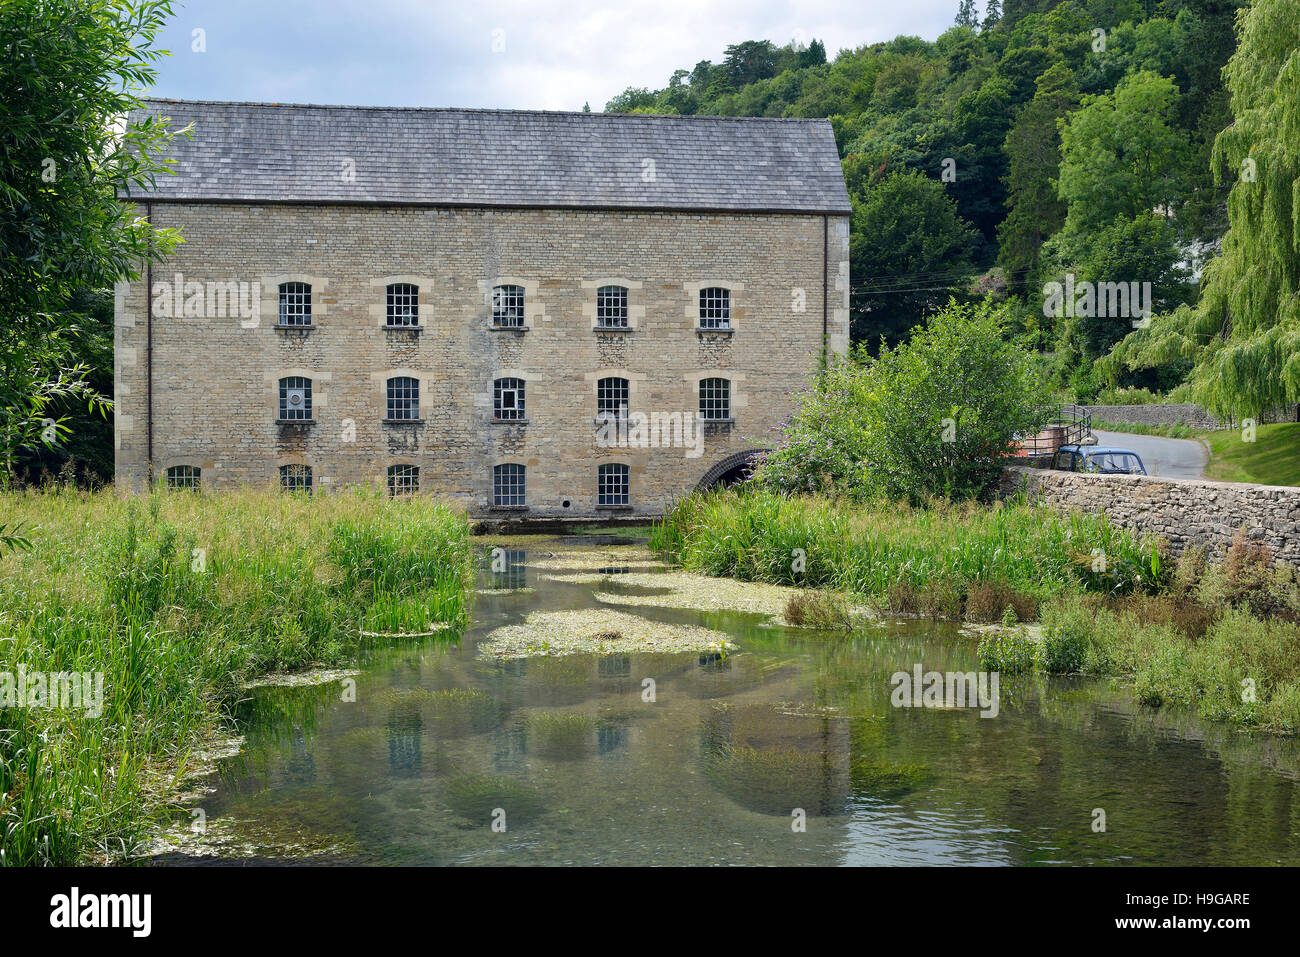 Belvedere Mill & fiume Frome Hove, Gloucestershire Foto Stock